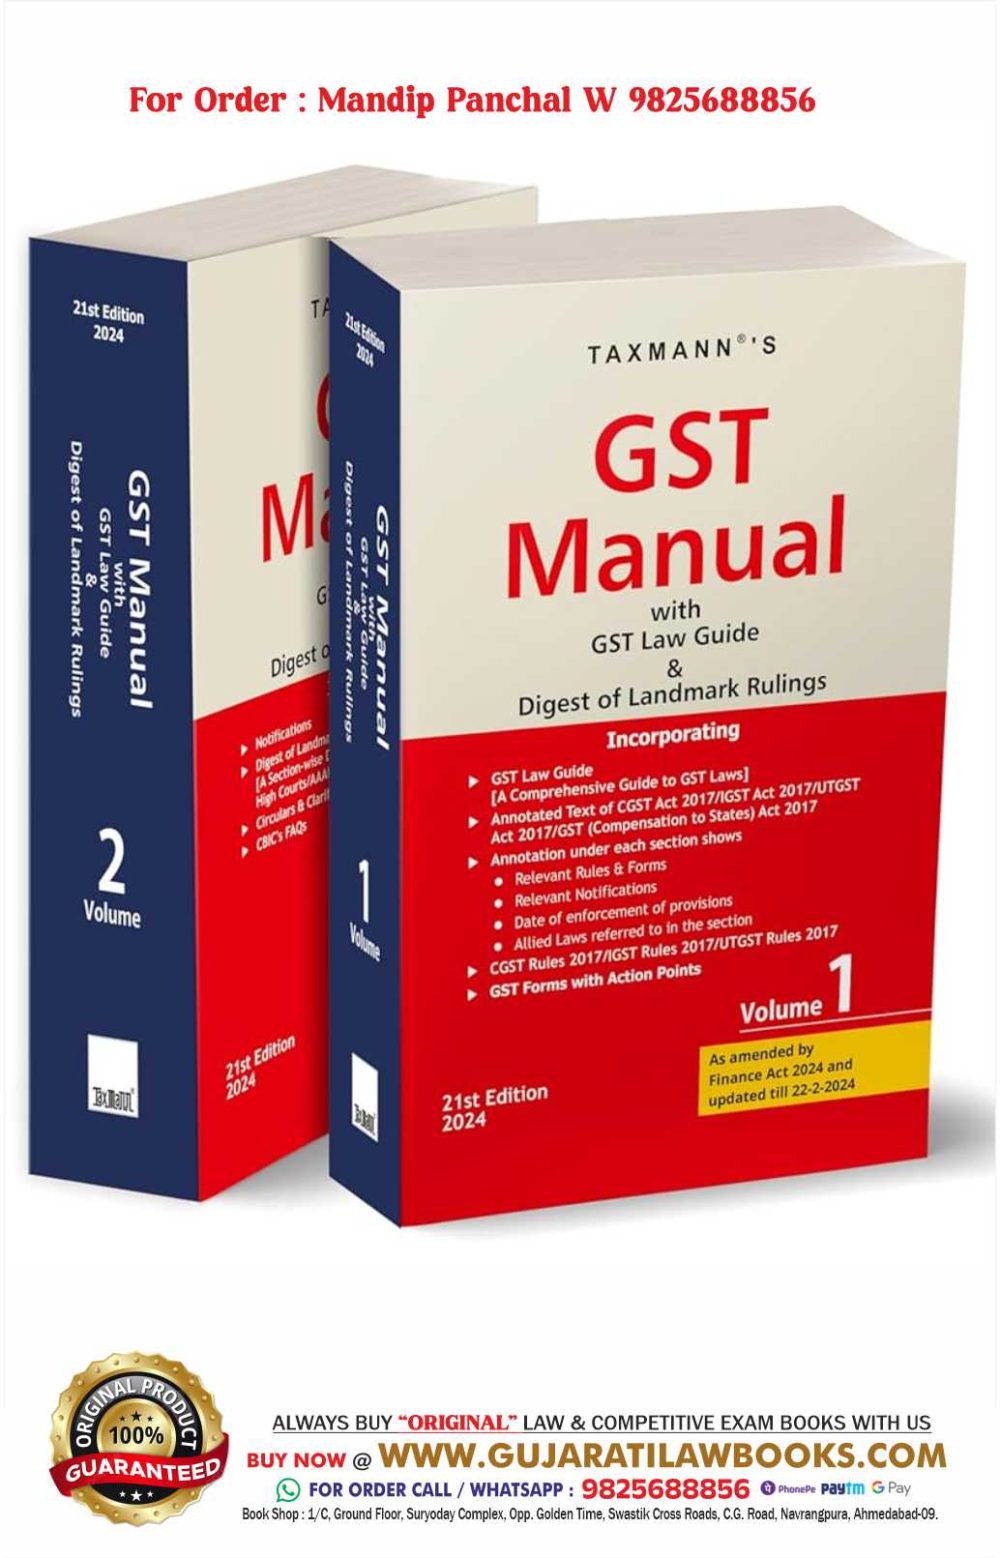 Taxmann's GST Manual with GST Law Guide & Digest of Landmark Rulings [Finance Act 2024] – Amended, updated & annotated text of CGST, IGST, UTGST Act & Rules with Forms, Notifications - Latest March 2024 Edition